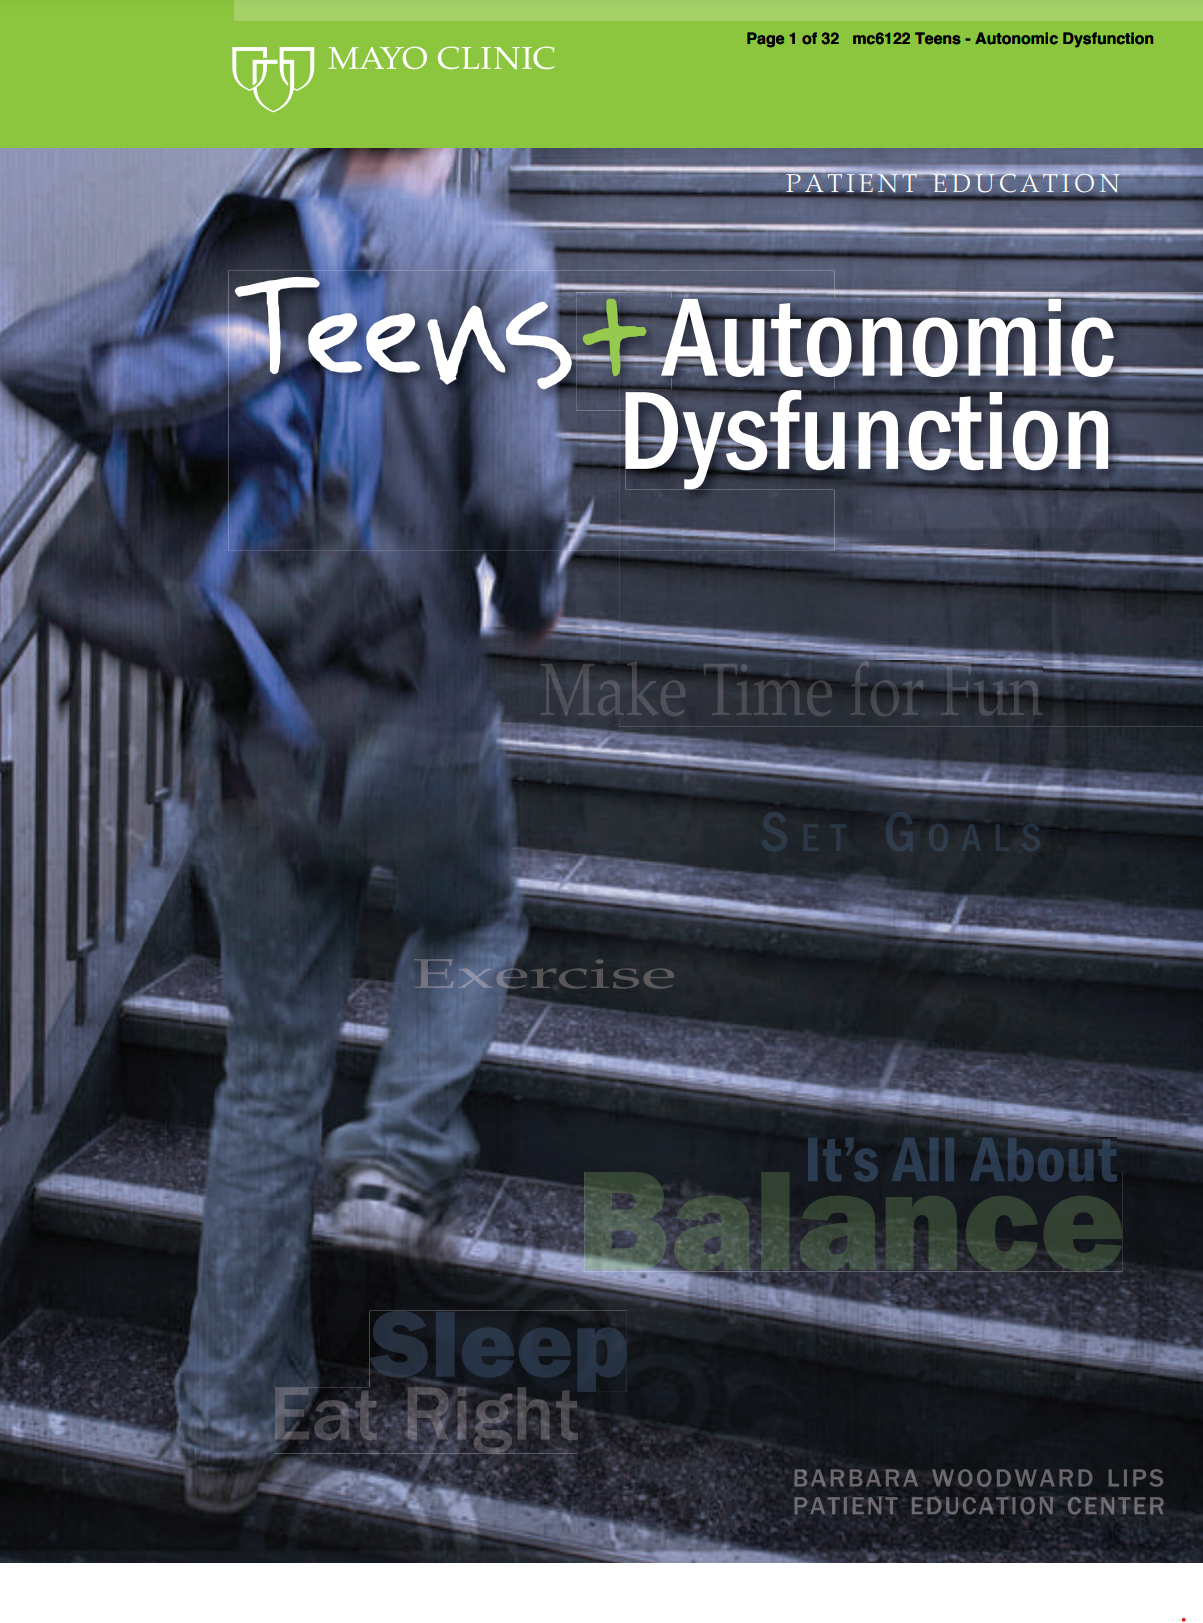 Screen shot of the cover of the Mayo Clinic booklet: Teens and Autonomic Dysfunction.